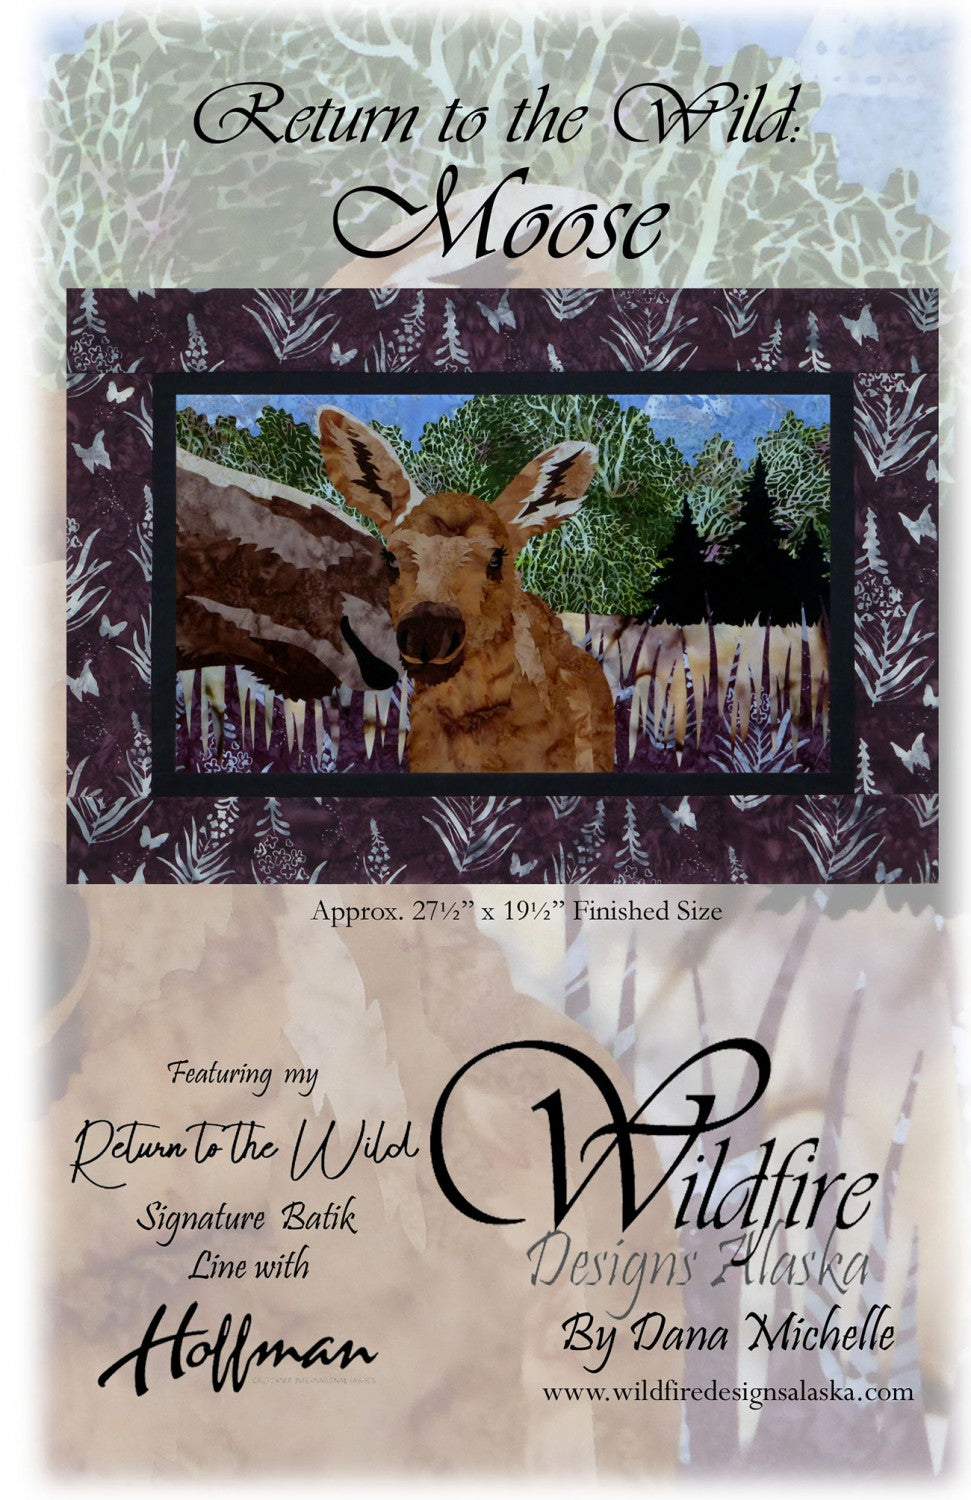 Wildfire Designs Alaska Return to the Wild Moose Laser Cut Applique Kit Front Cover